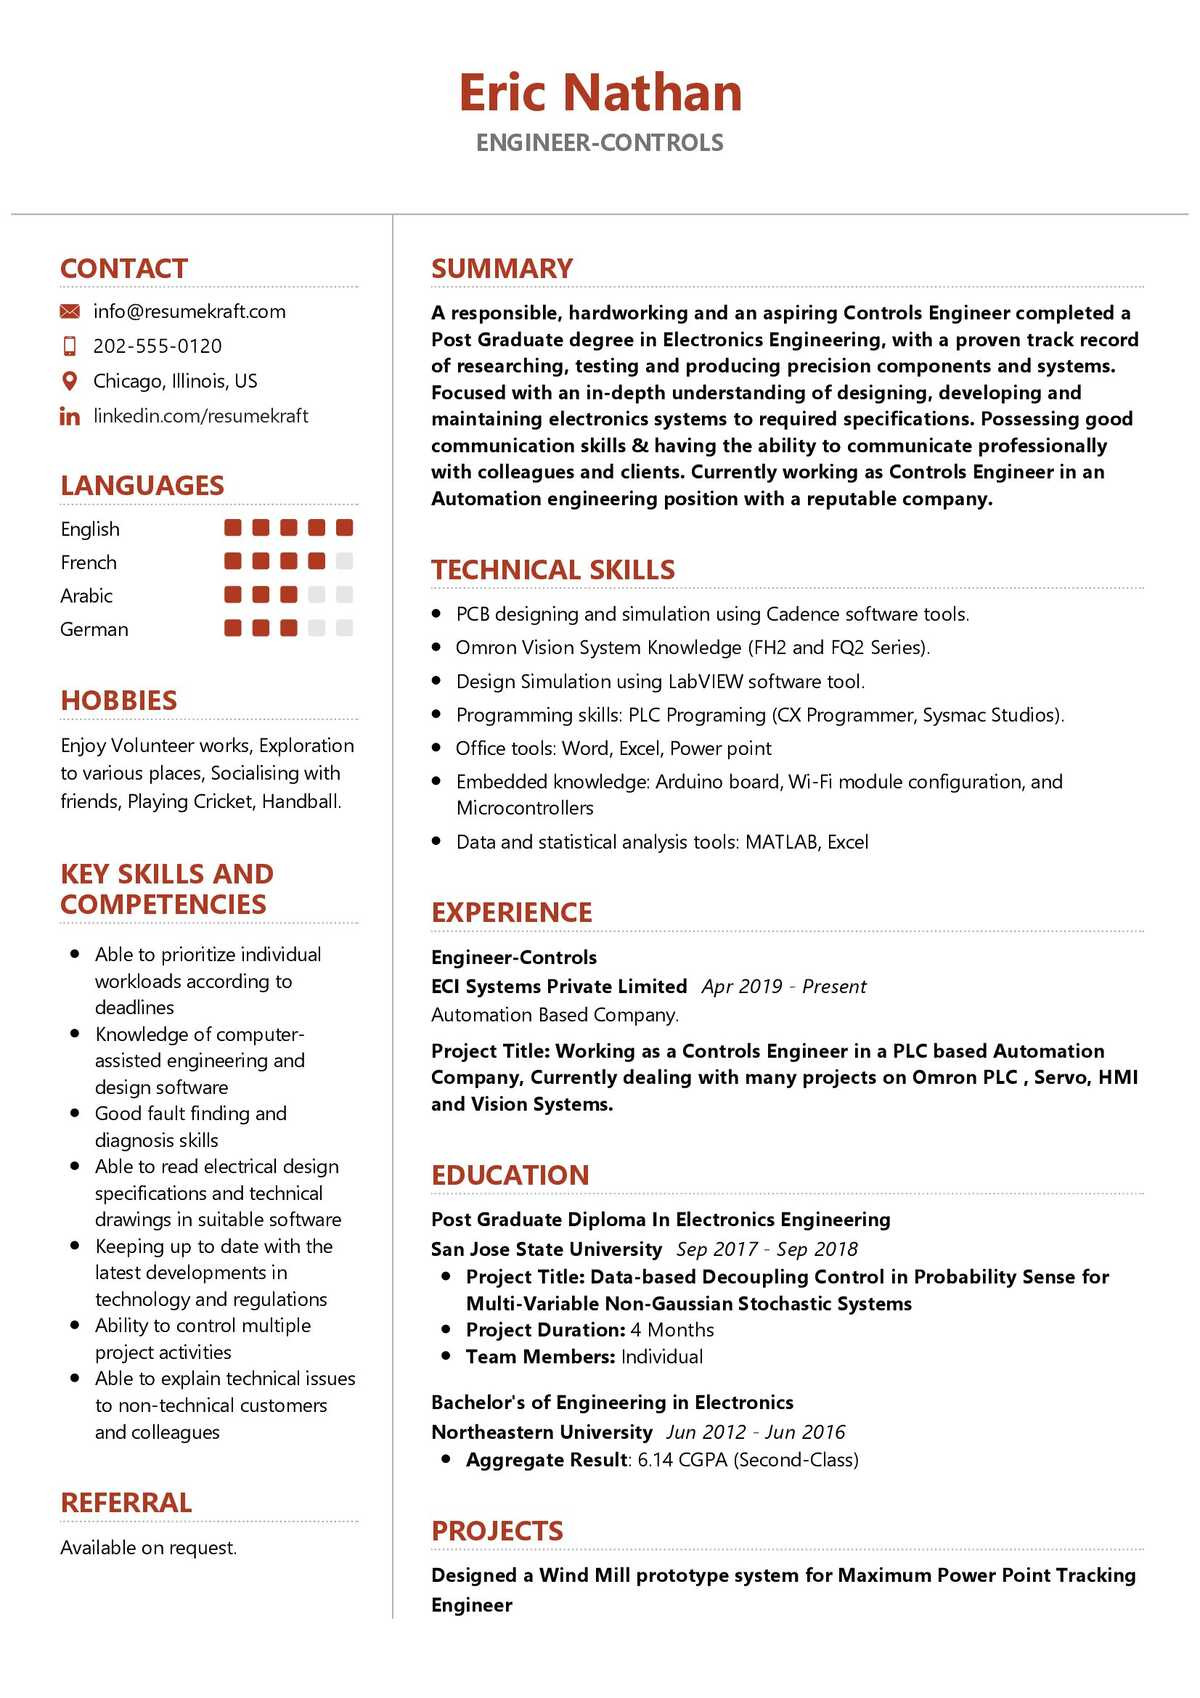 Electronics and Communication Engineering Resume Samples for Experience Engineer Controls Resume Sample 2021 Writing Tips – Resumekraft